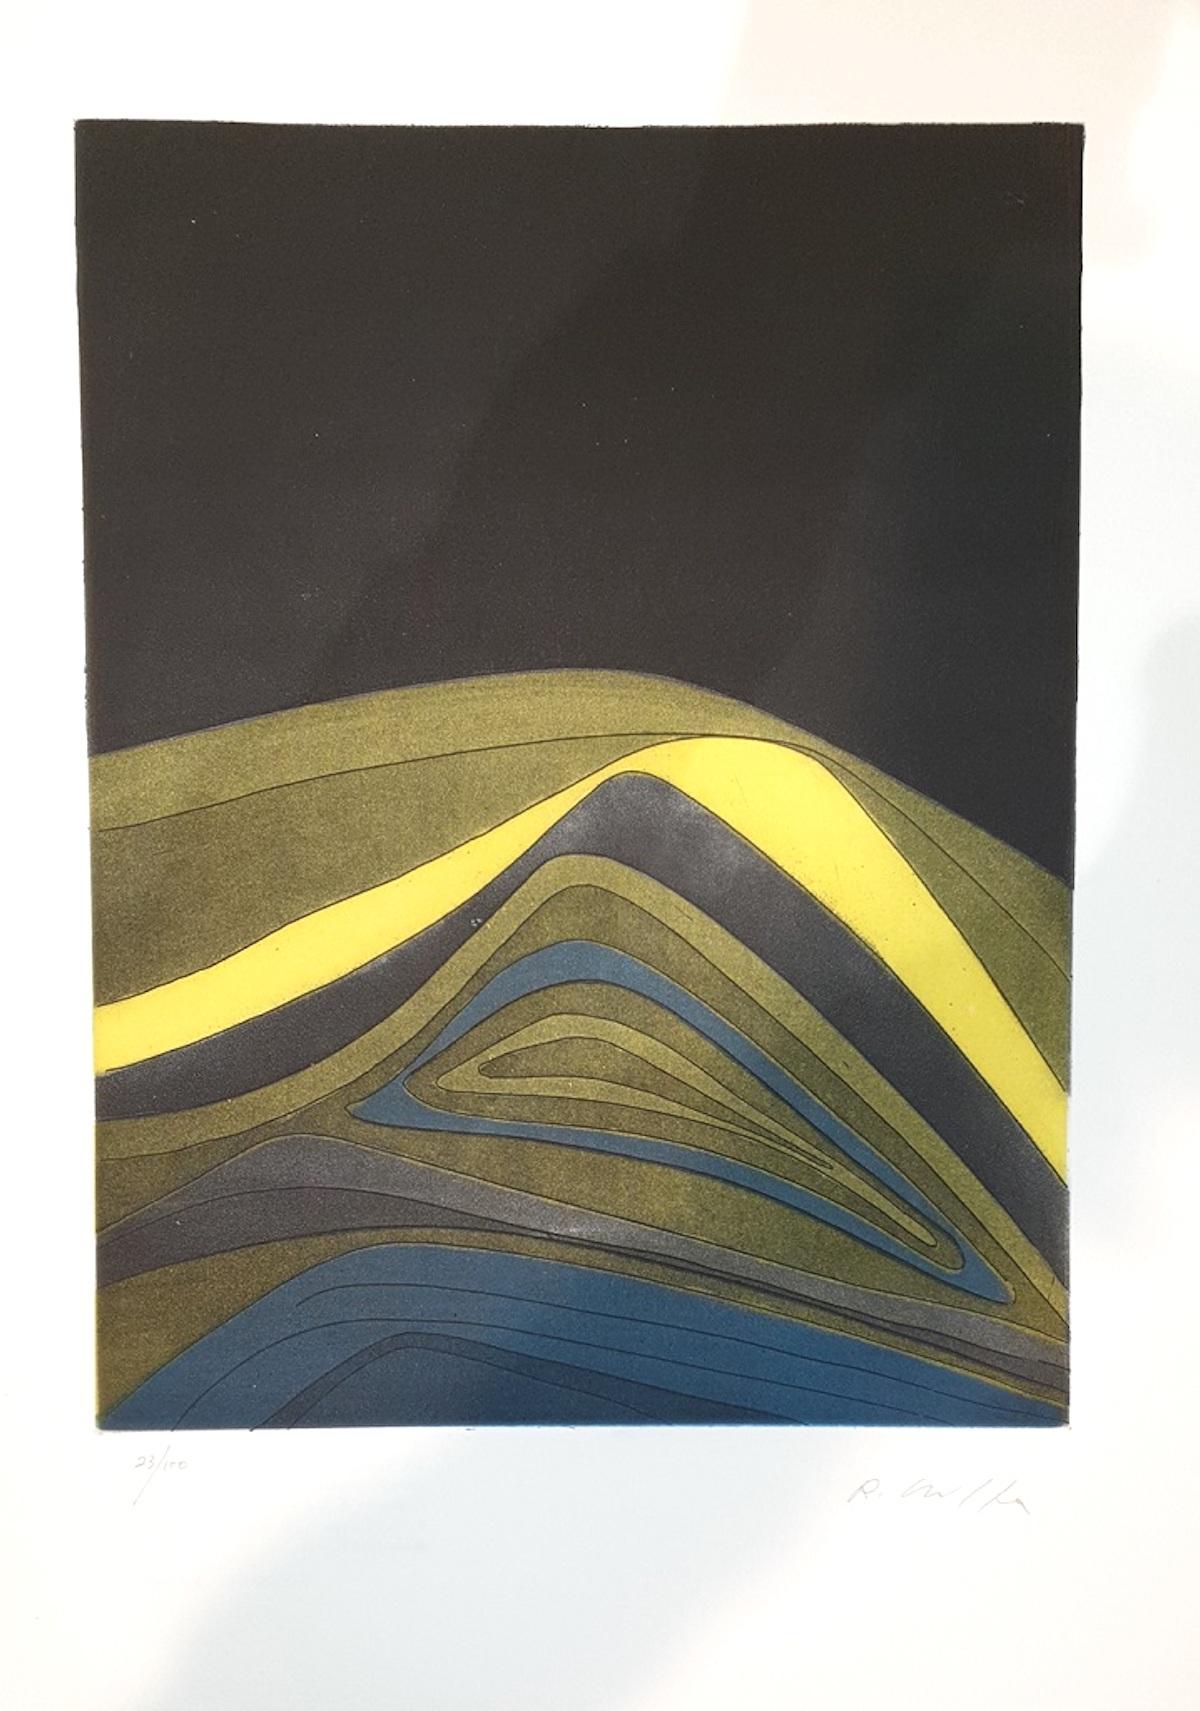 Roberto Crippa Abstract Print - Plate IV from Suns/Landscapes - Etching by R. Crippa - 1971/72